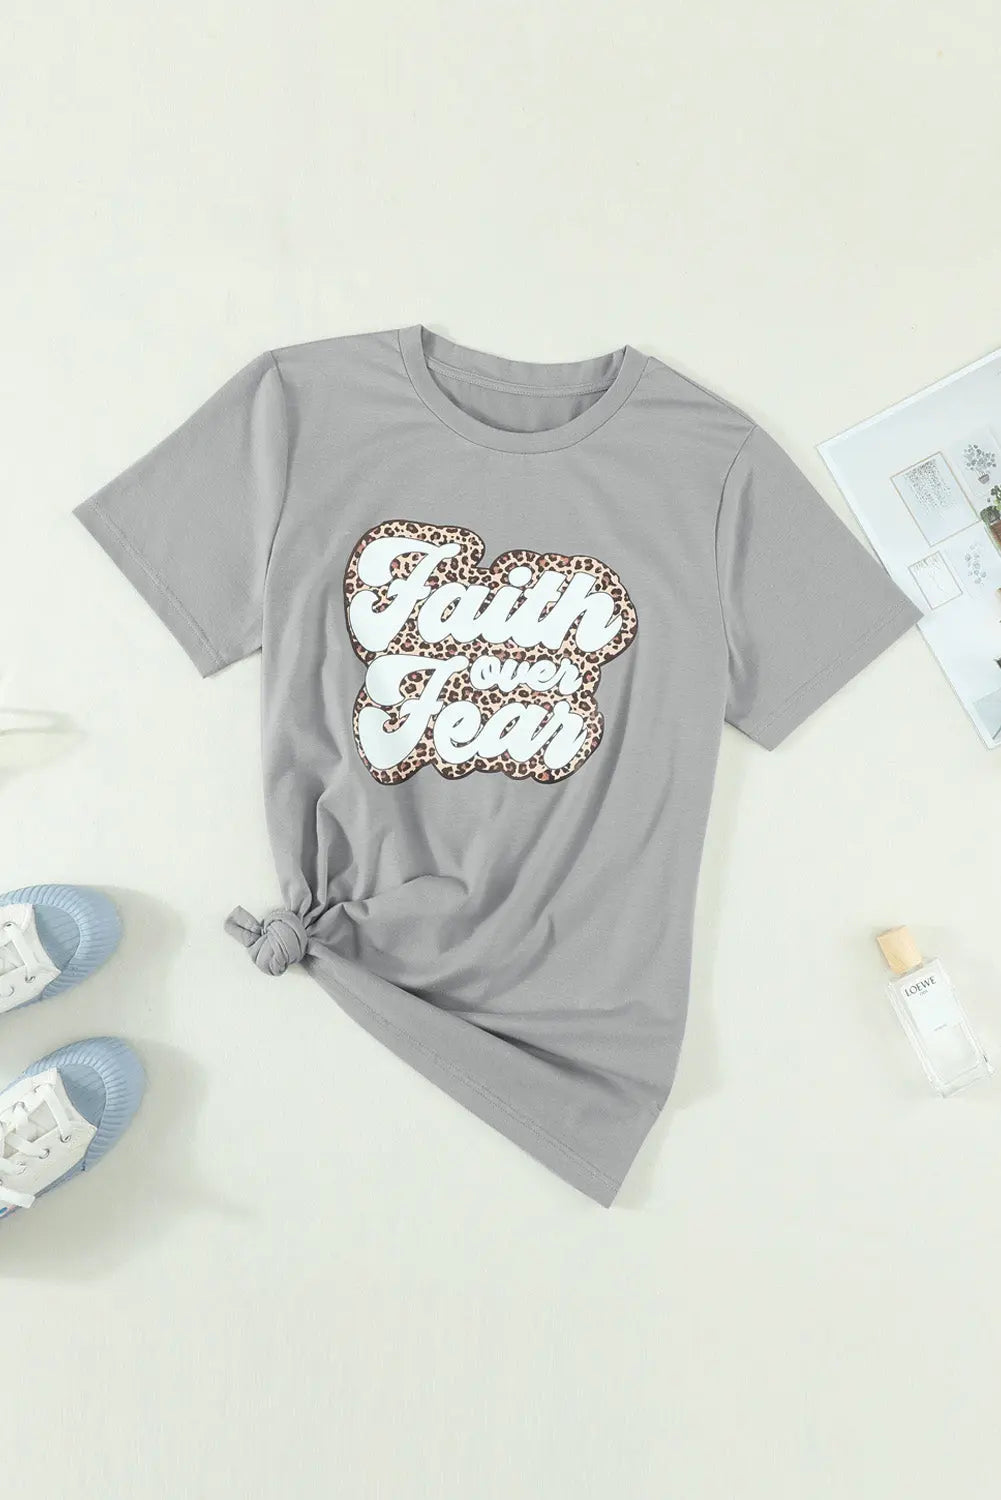 FAITH OVER FEAR Graphic Round Neck Tee - Scarlett's Riverside Boutique 